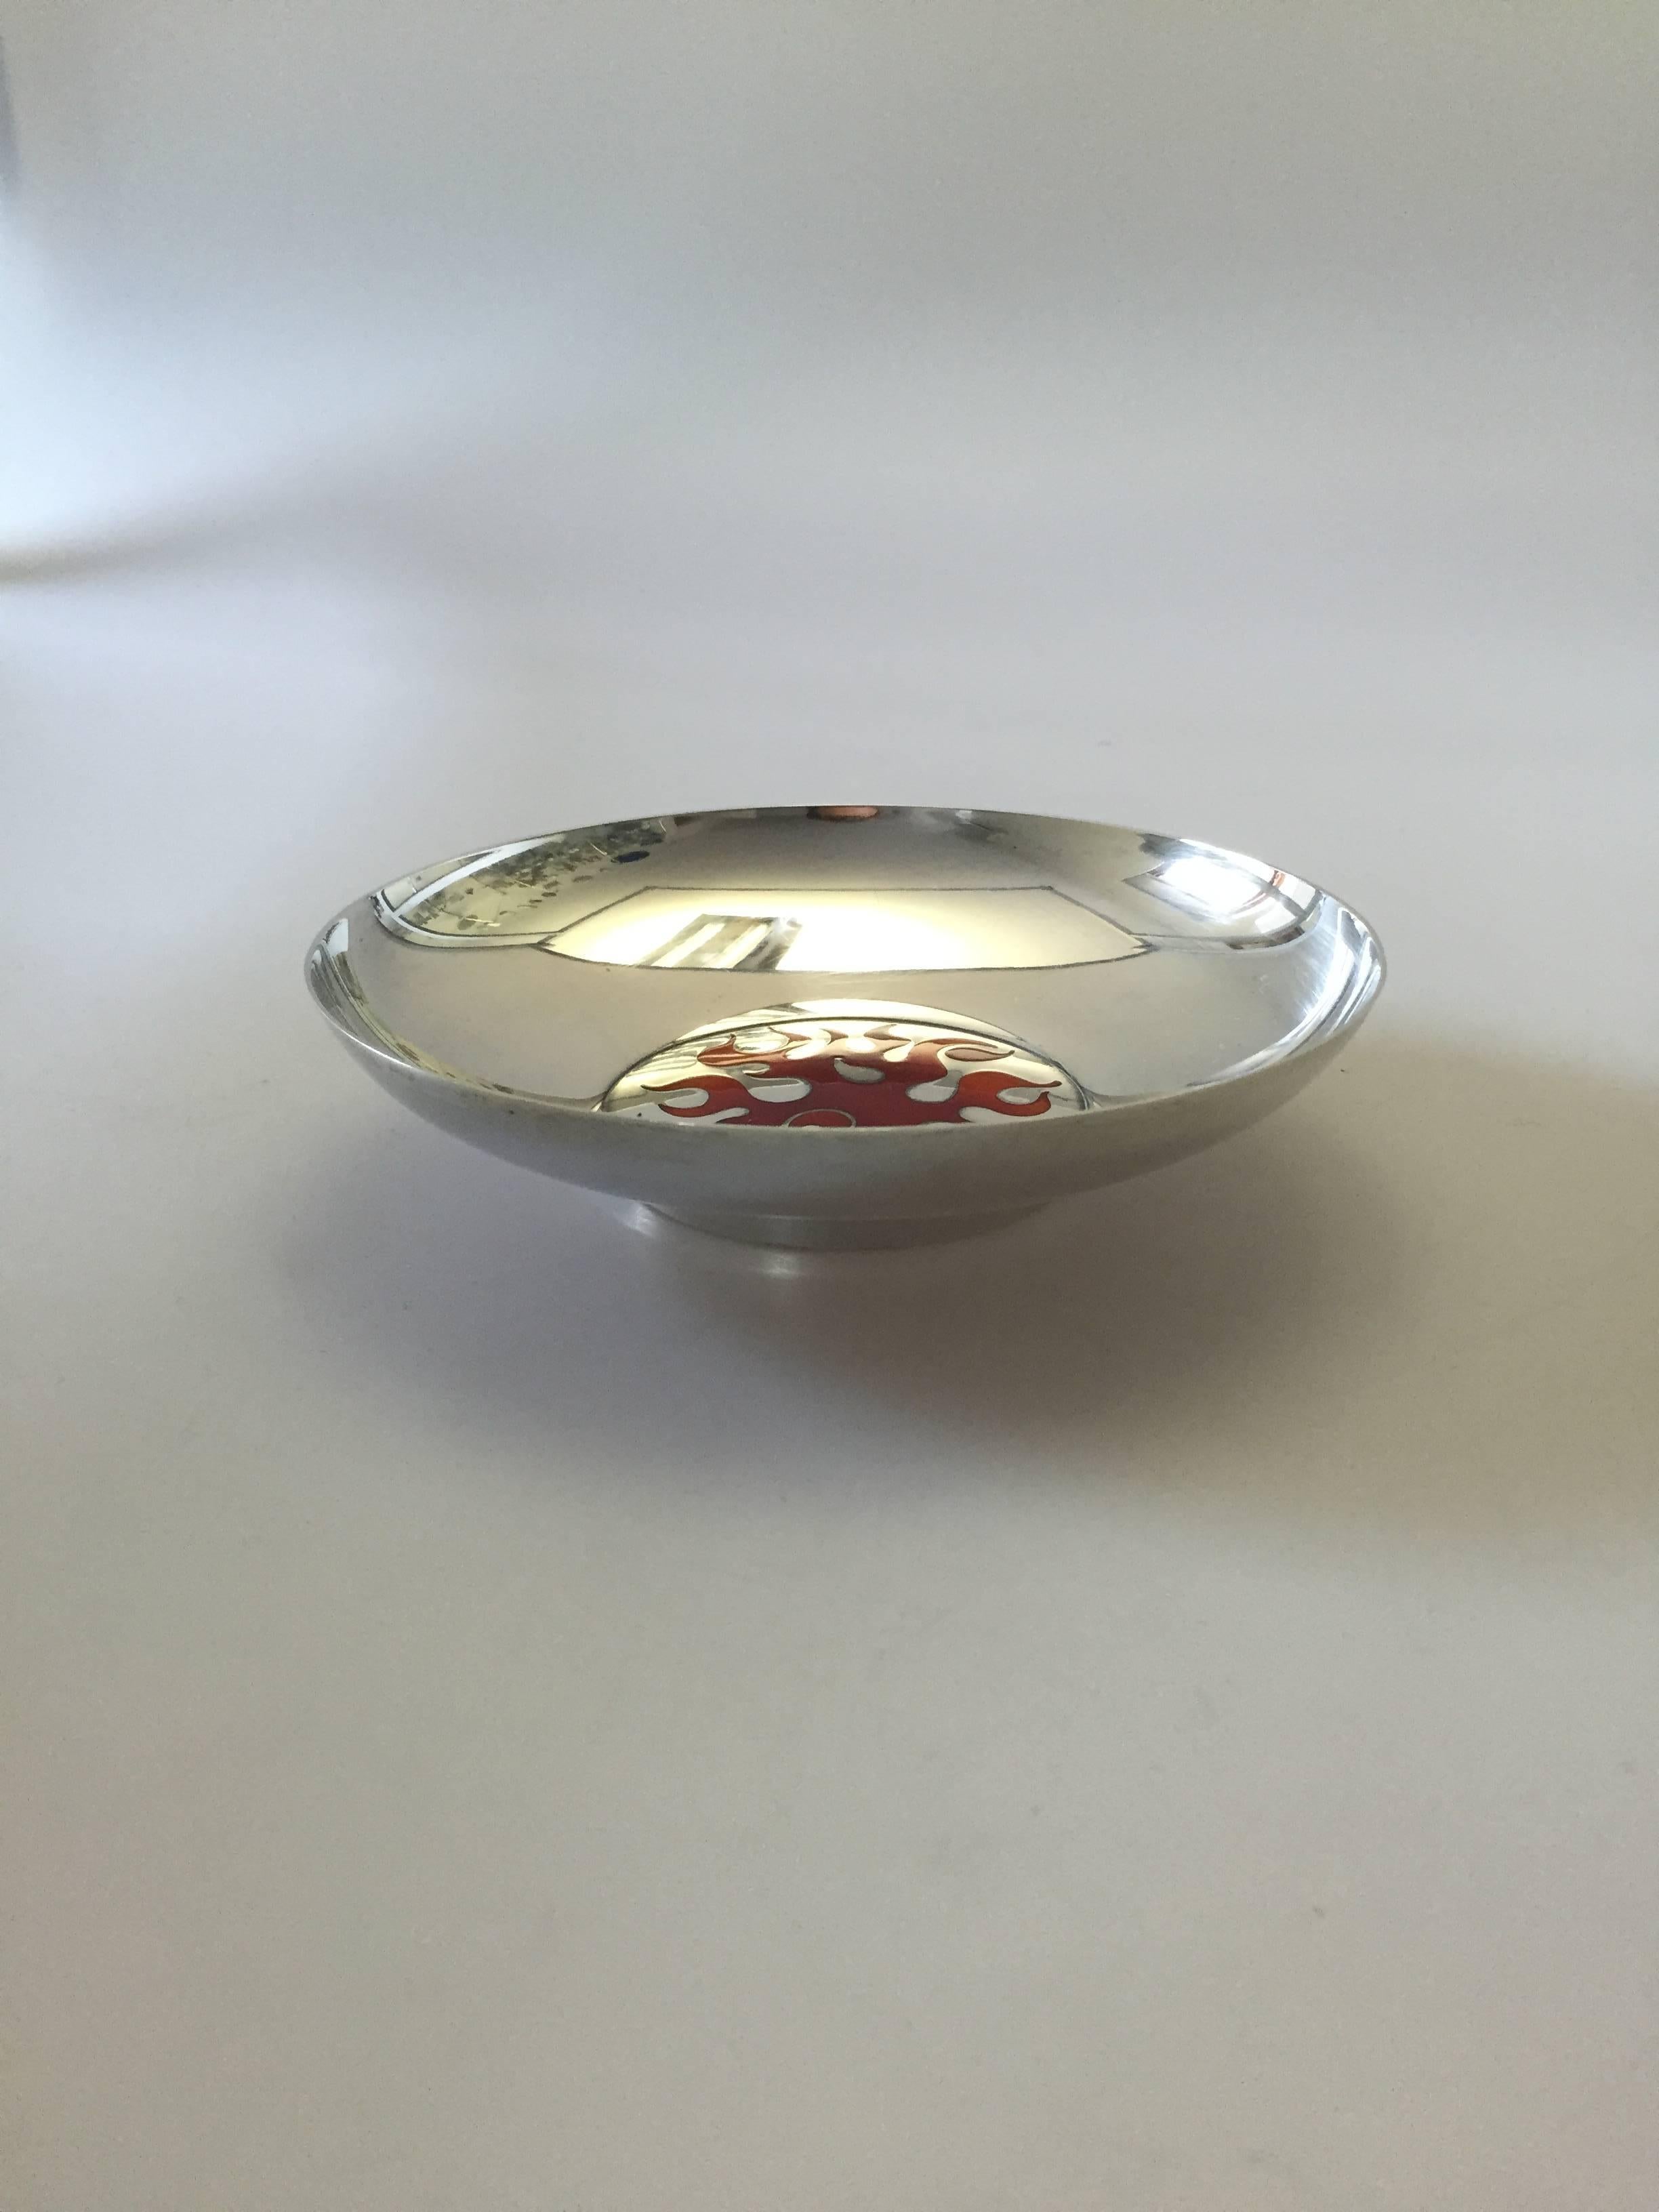 Georg Jensen sterling silver Henning Koppel bowl with red and orange enamel fire print at the bottom of the silver bowl, post 1945.

Henning Koppels (1918-1981) modern designs broke new ground for Georg Jensen. His designs were constructed in